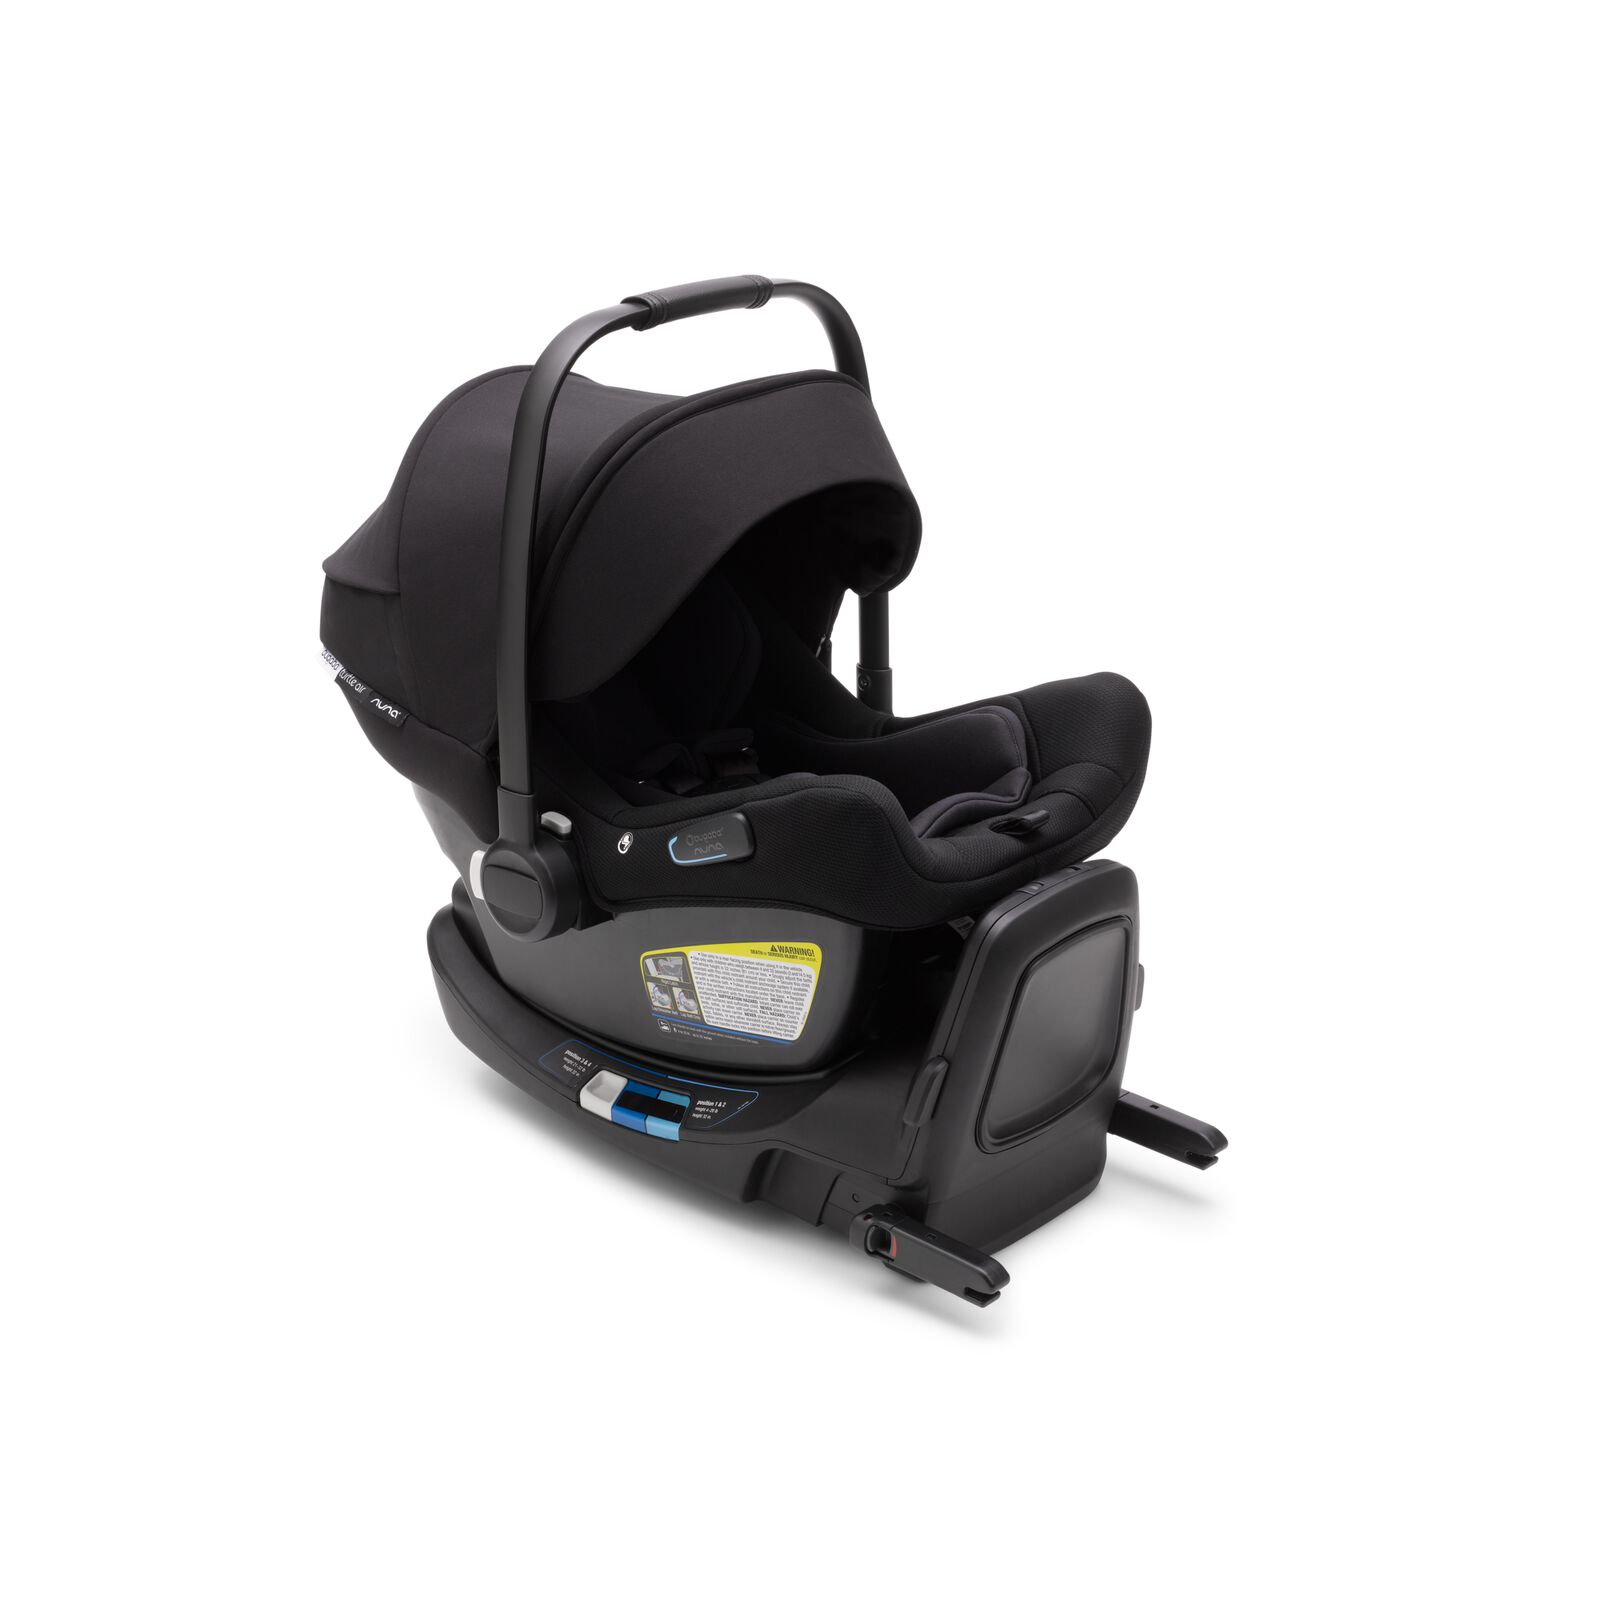 Bugaboo Turtle Air by Nuna car seat with recline base - View 1